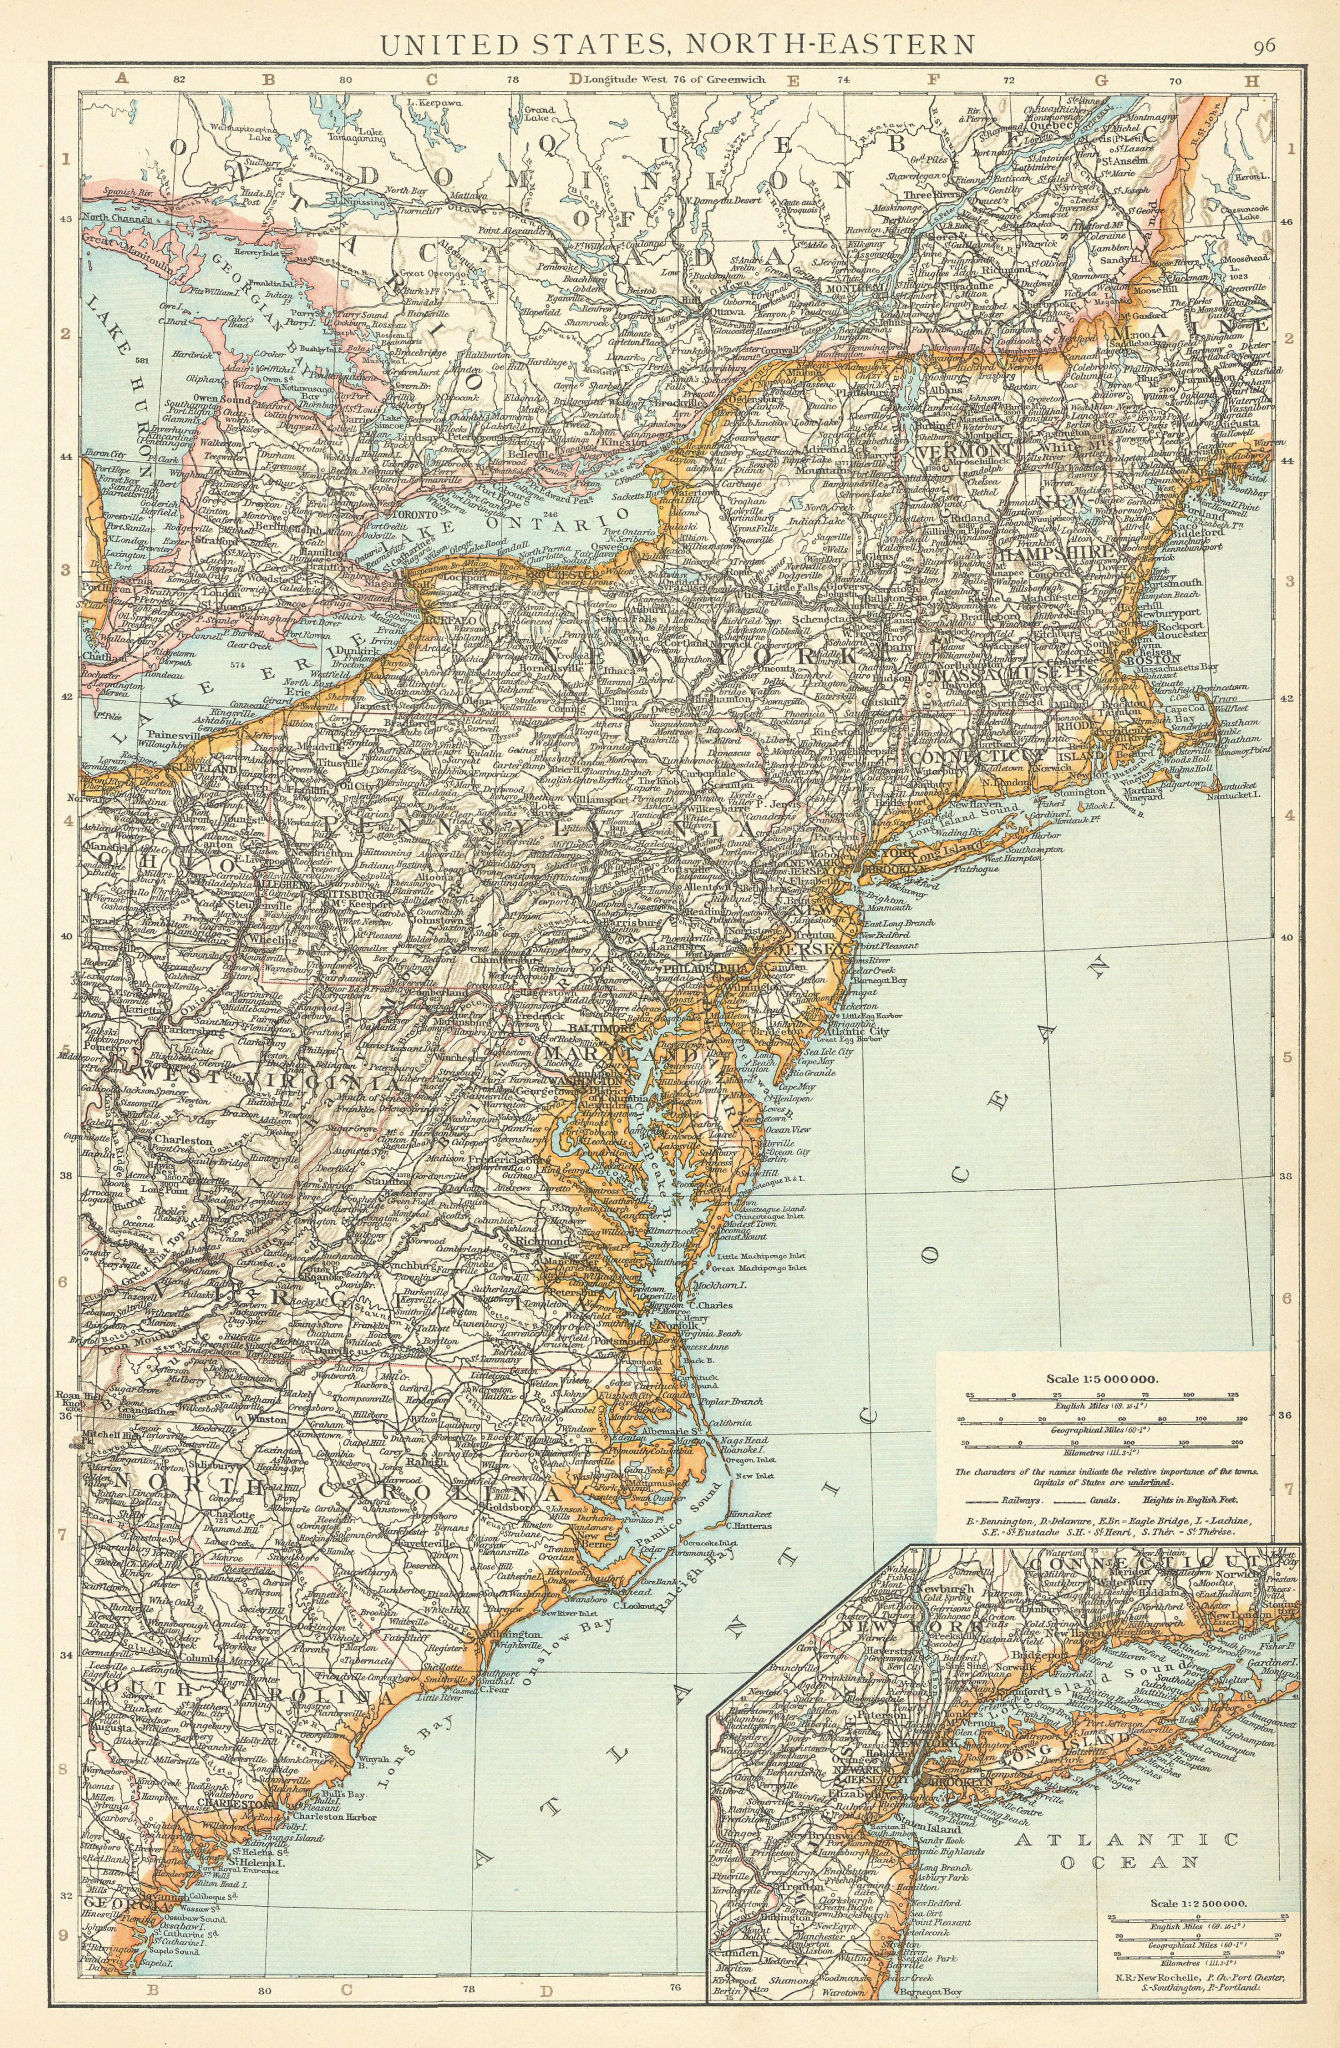 Associate Product North-east United States. New England Atlantic Seaboard. TIMES 1895 old map